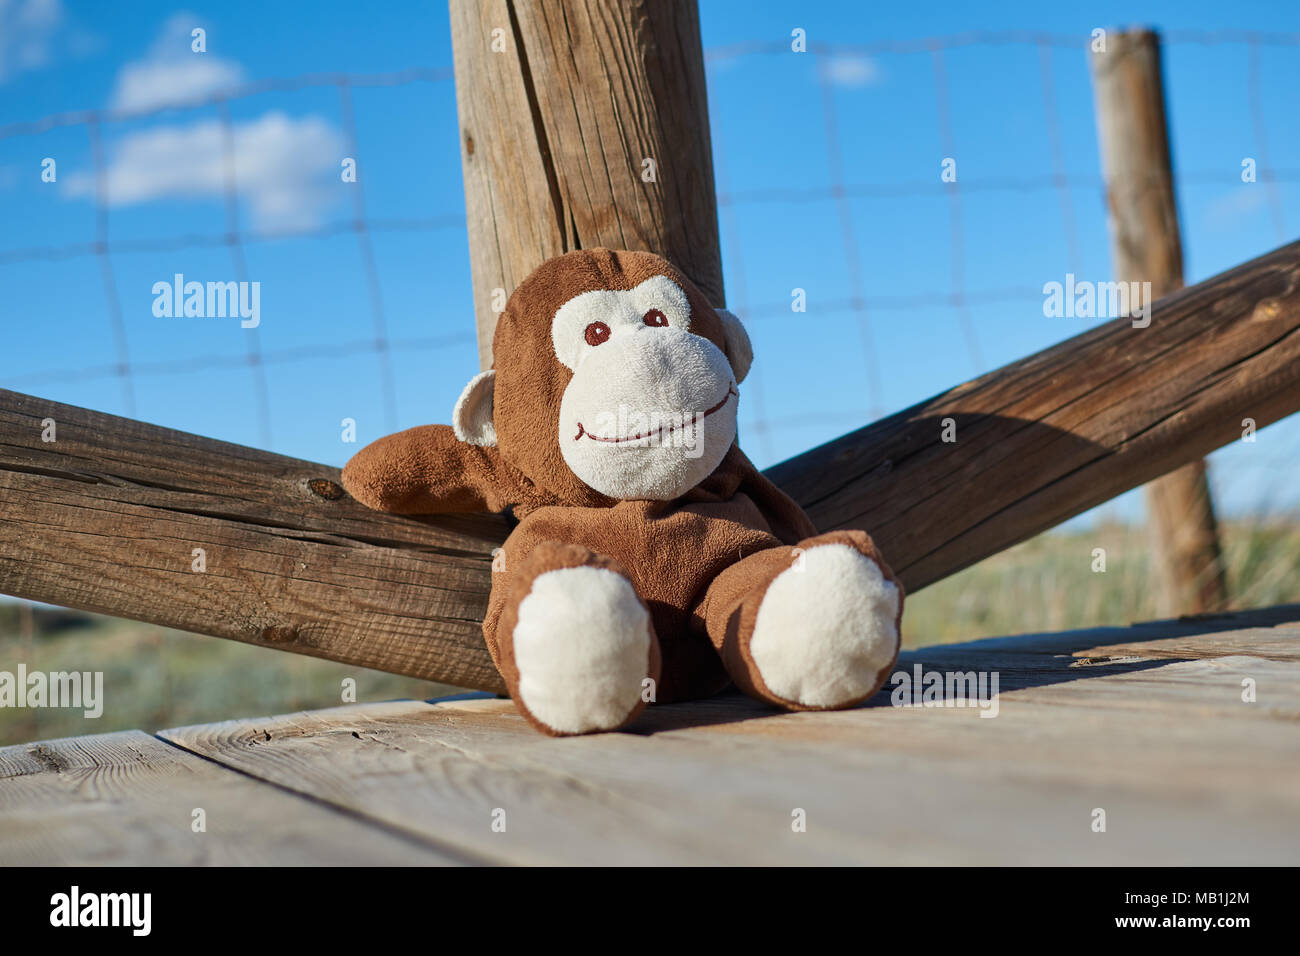 Closeup of a lovely brown and white toy monkey smiling happily sitting on a wooden floor and leaning comfortably on a wooden railing Stock Photo